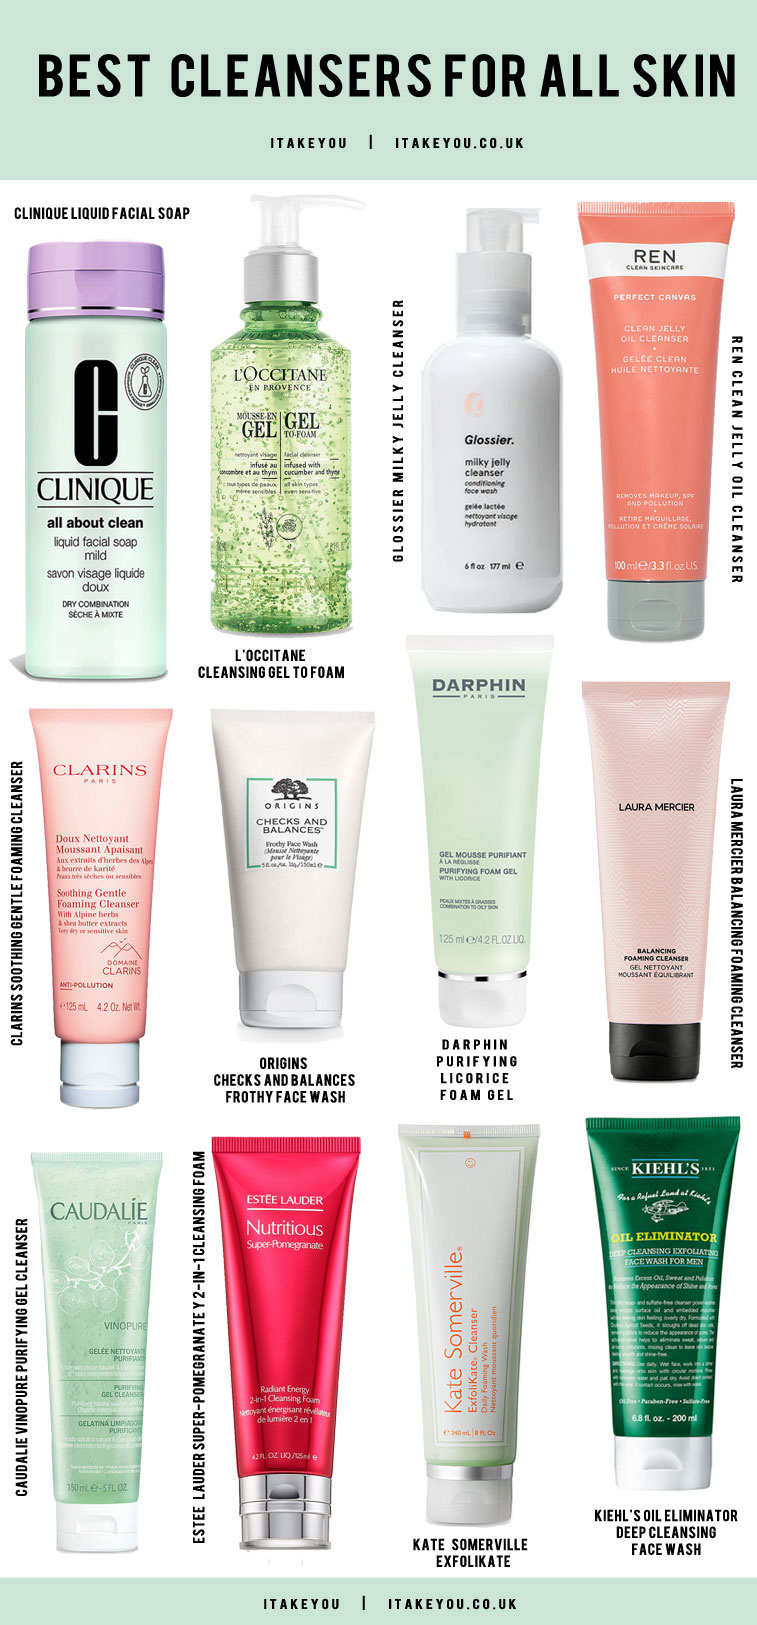 best facial cleanser, best cleansers, best face washes, best cleansers for combination skin, best cleanser for oily skin uk, best cleanser for glowing skin